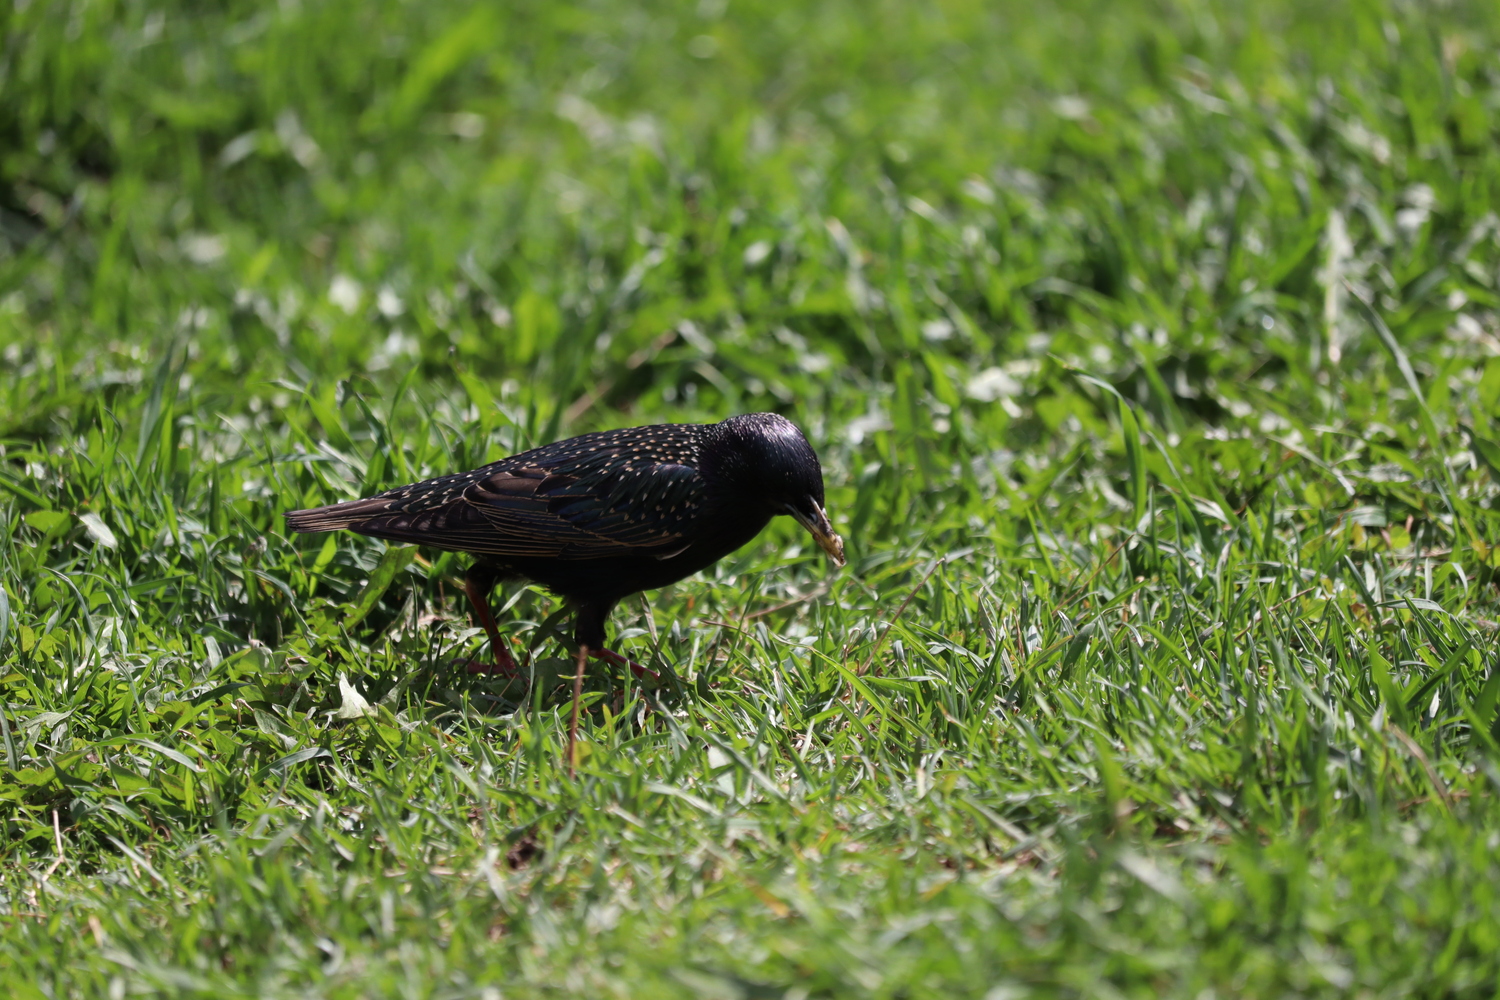 a black bird standing in the grass
with something small in its beak.
its black feathers are spotted with white.